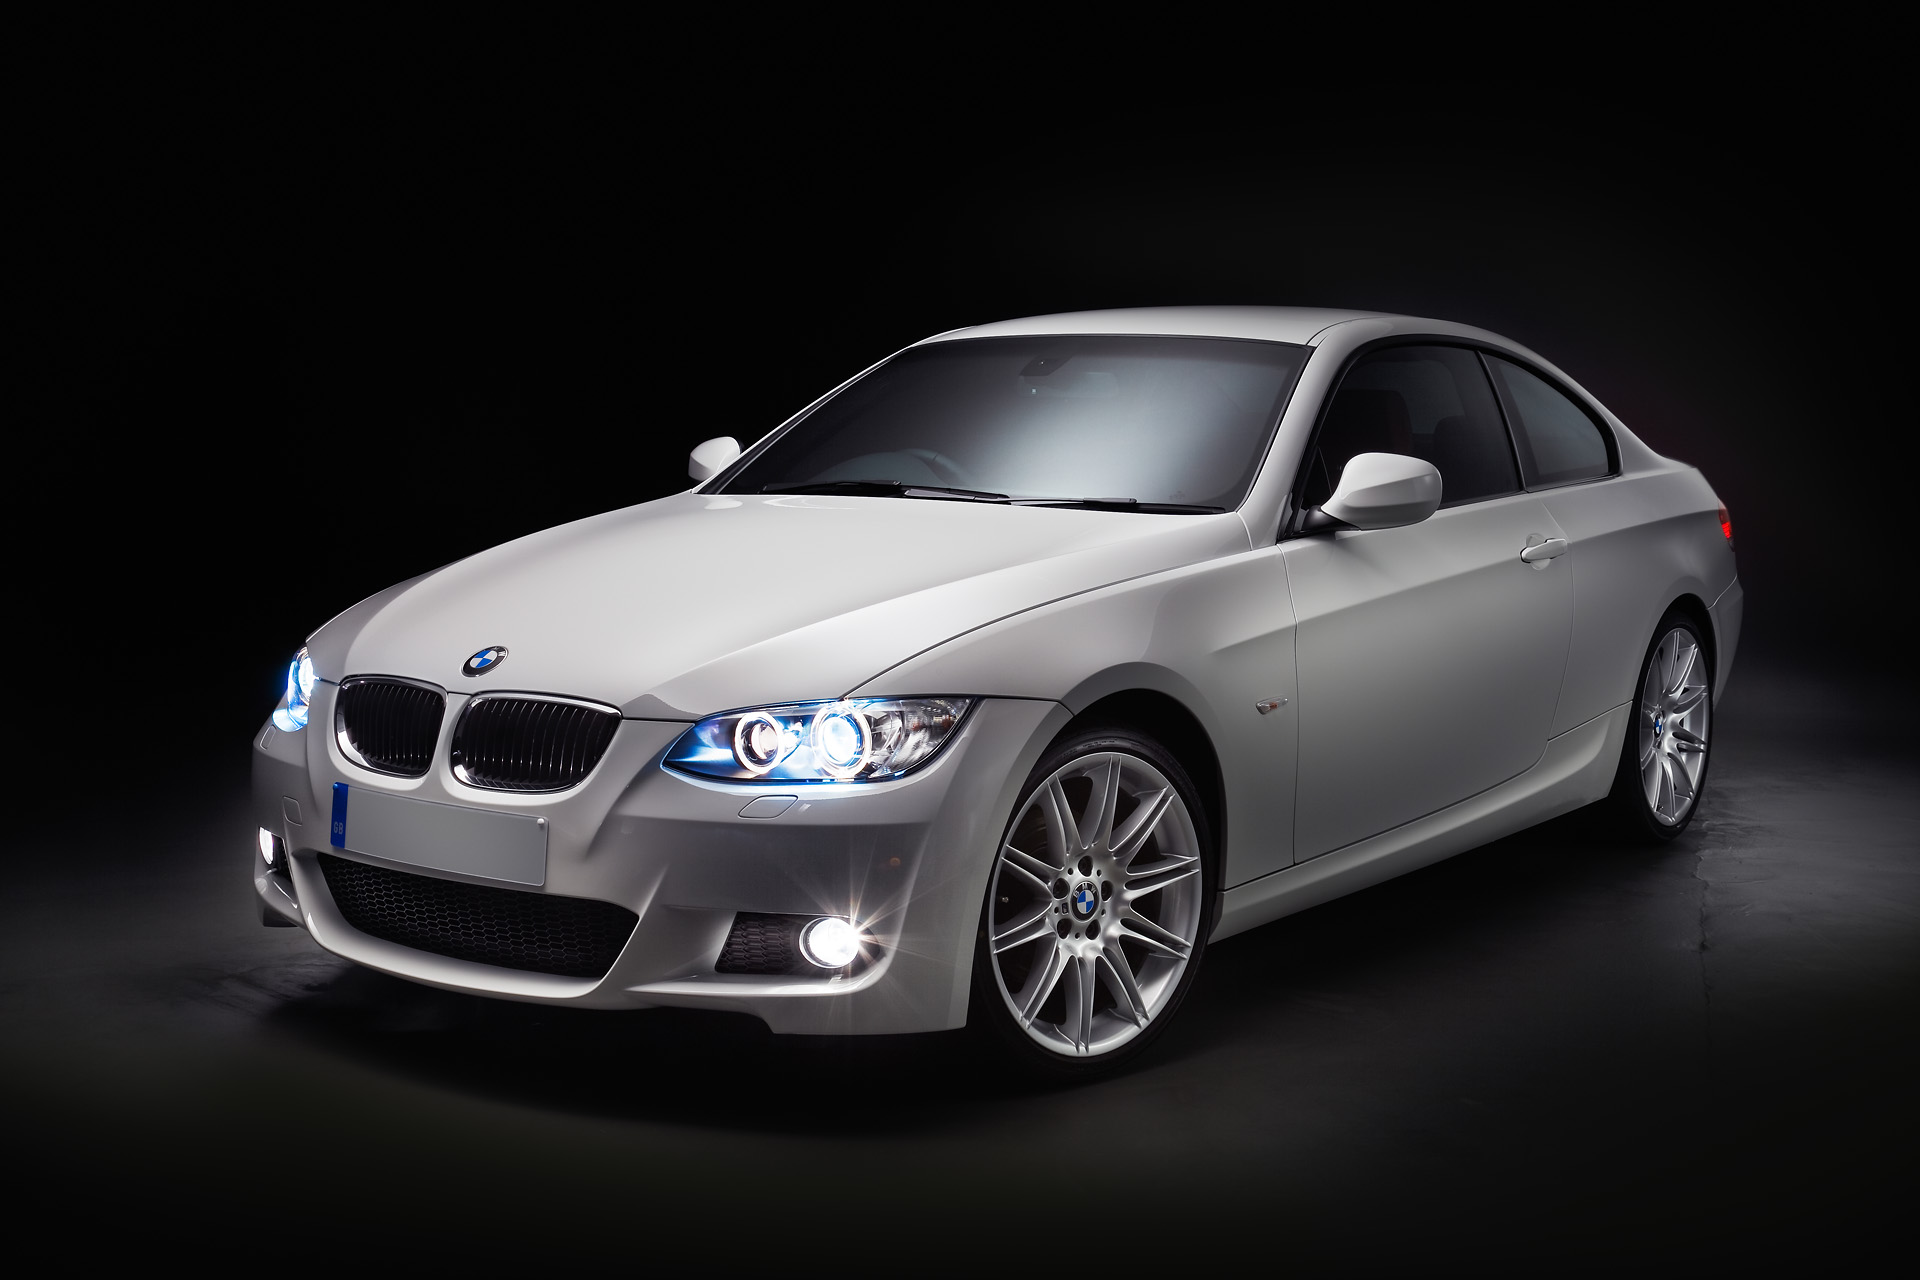 BMW 320d coupe 2009 | Flickr - Photo Sharing!